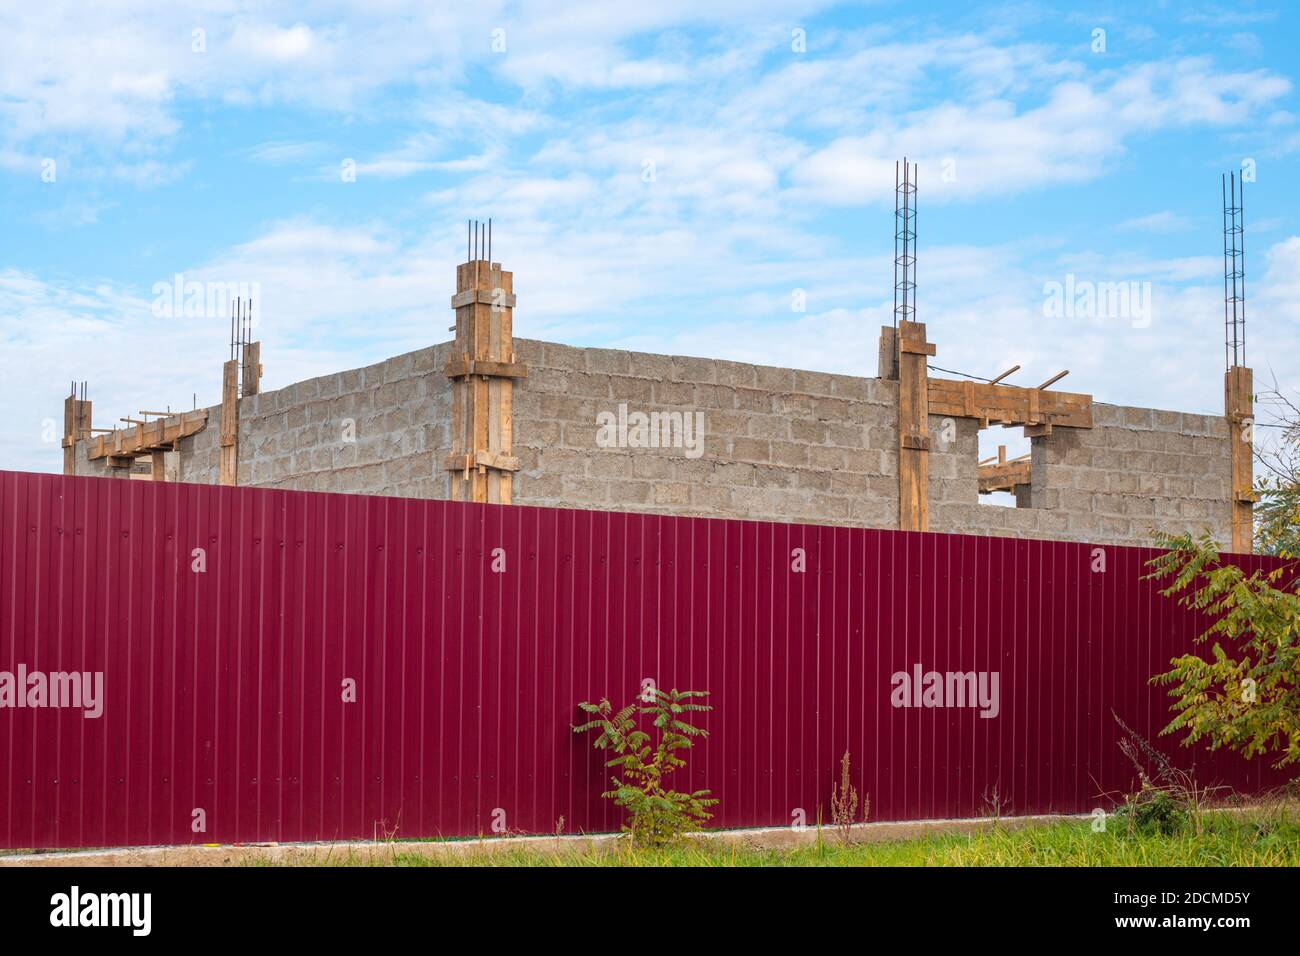 Construction stages. Cinder block house with protruding fittings behind a burgundy fence. Stock Photo